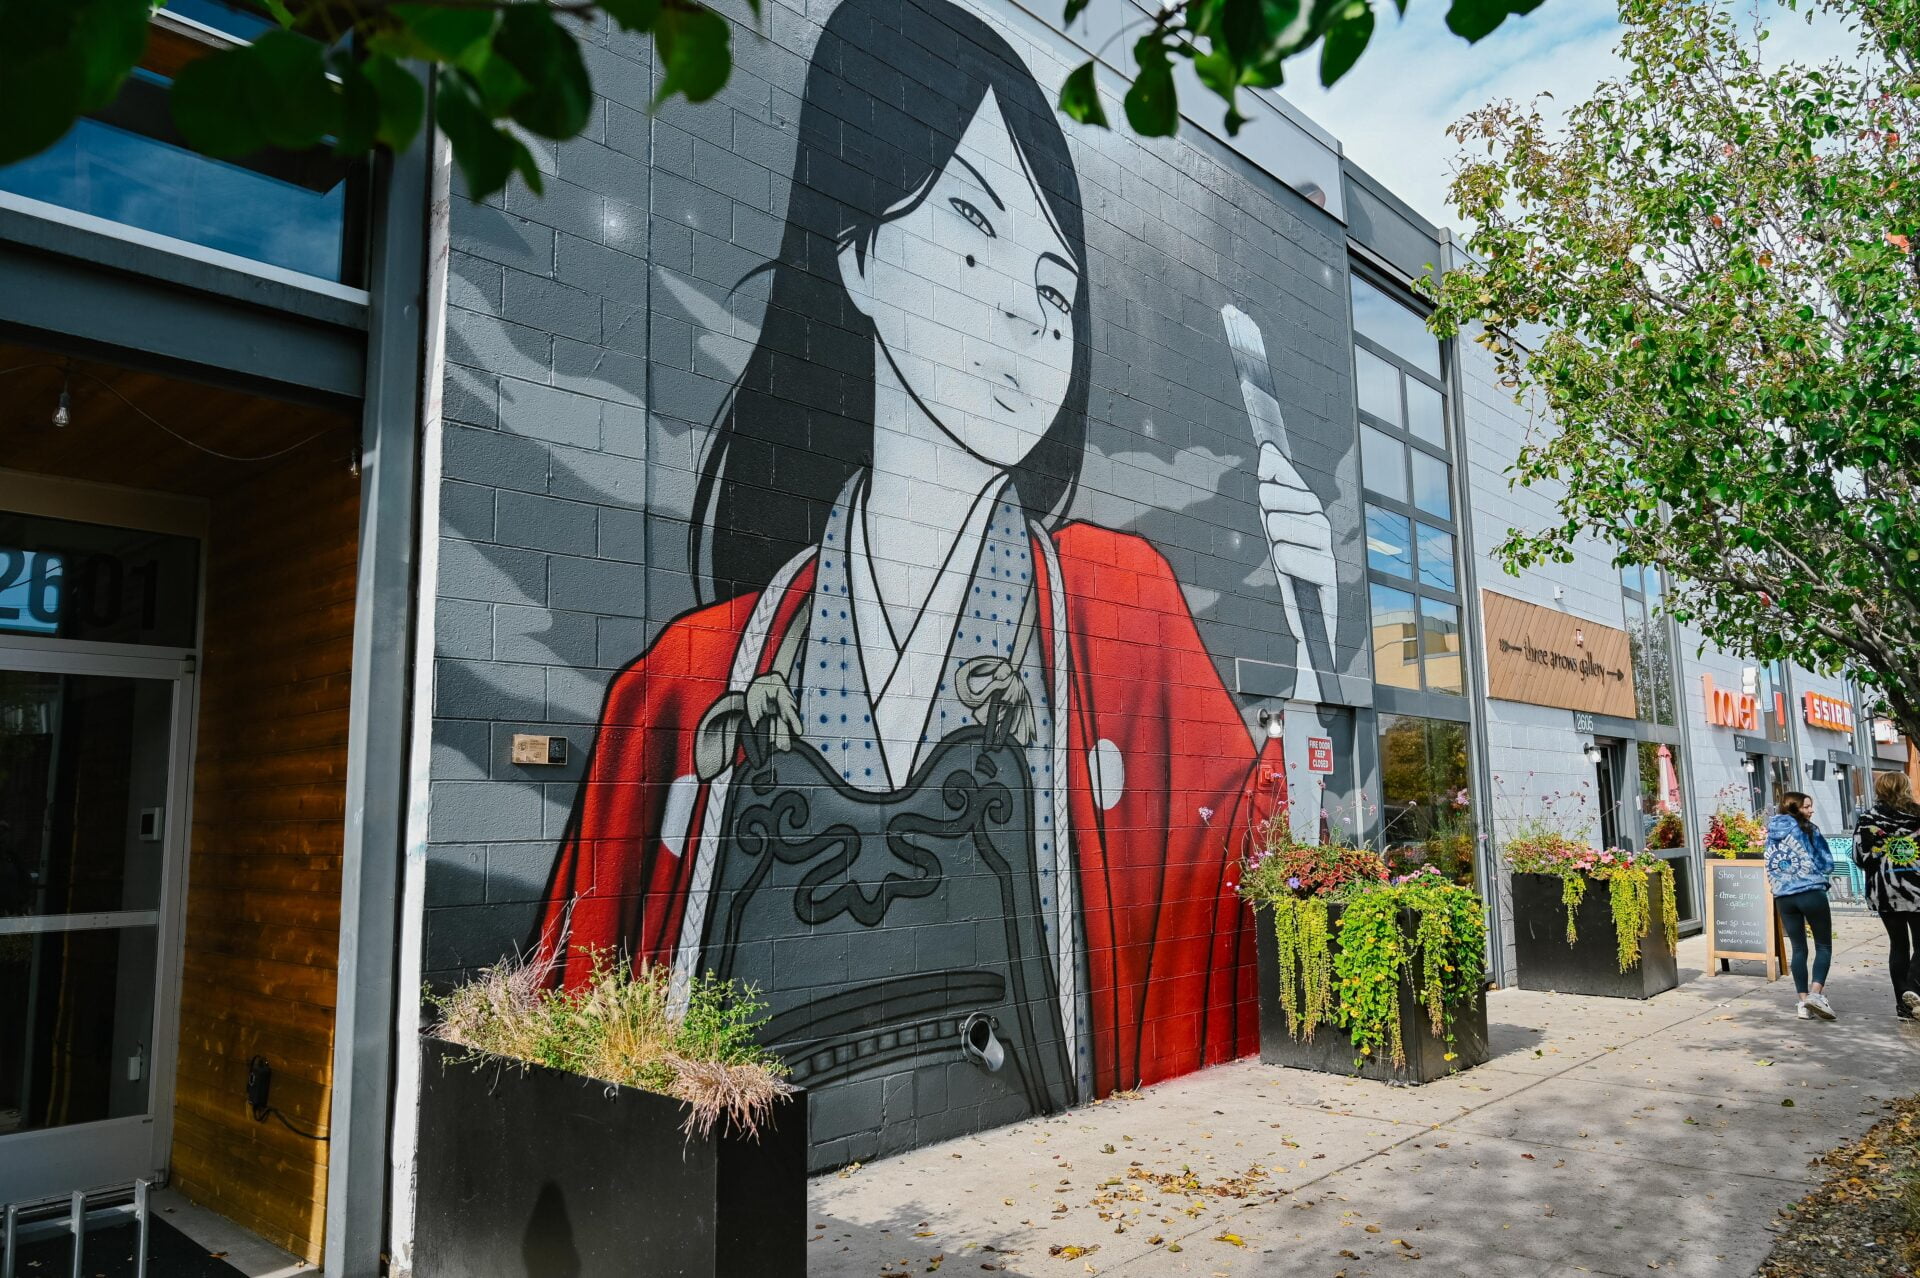 mural of a woman wearing red and holding a paintbrush